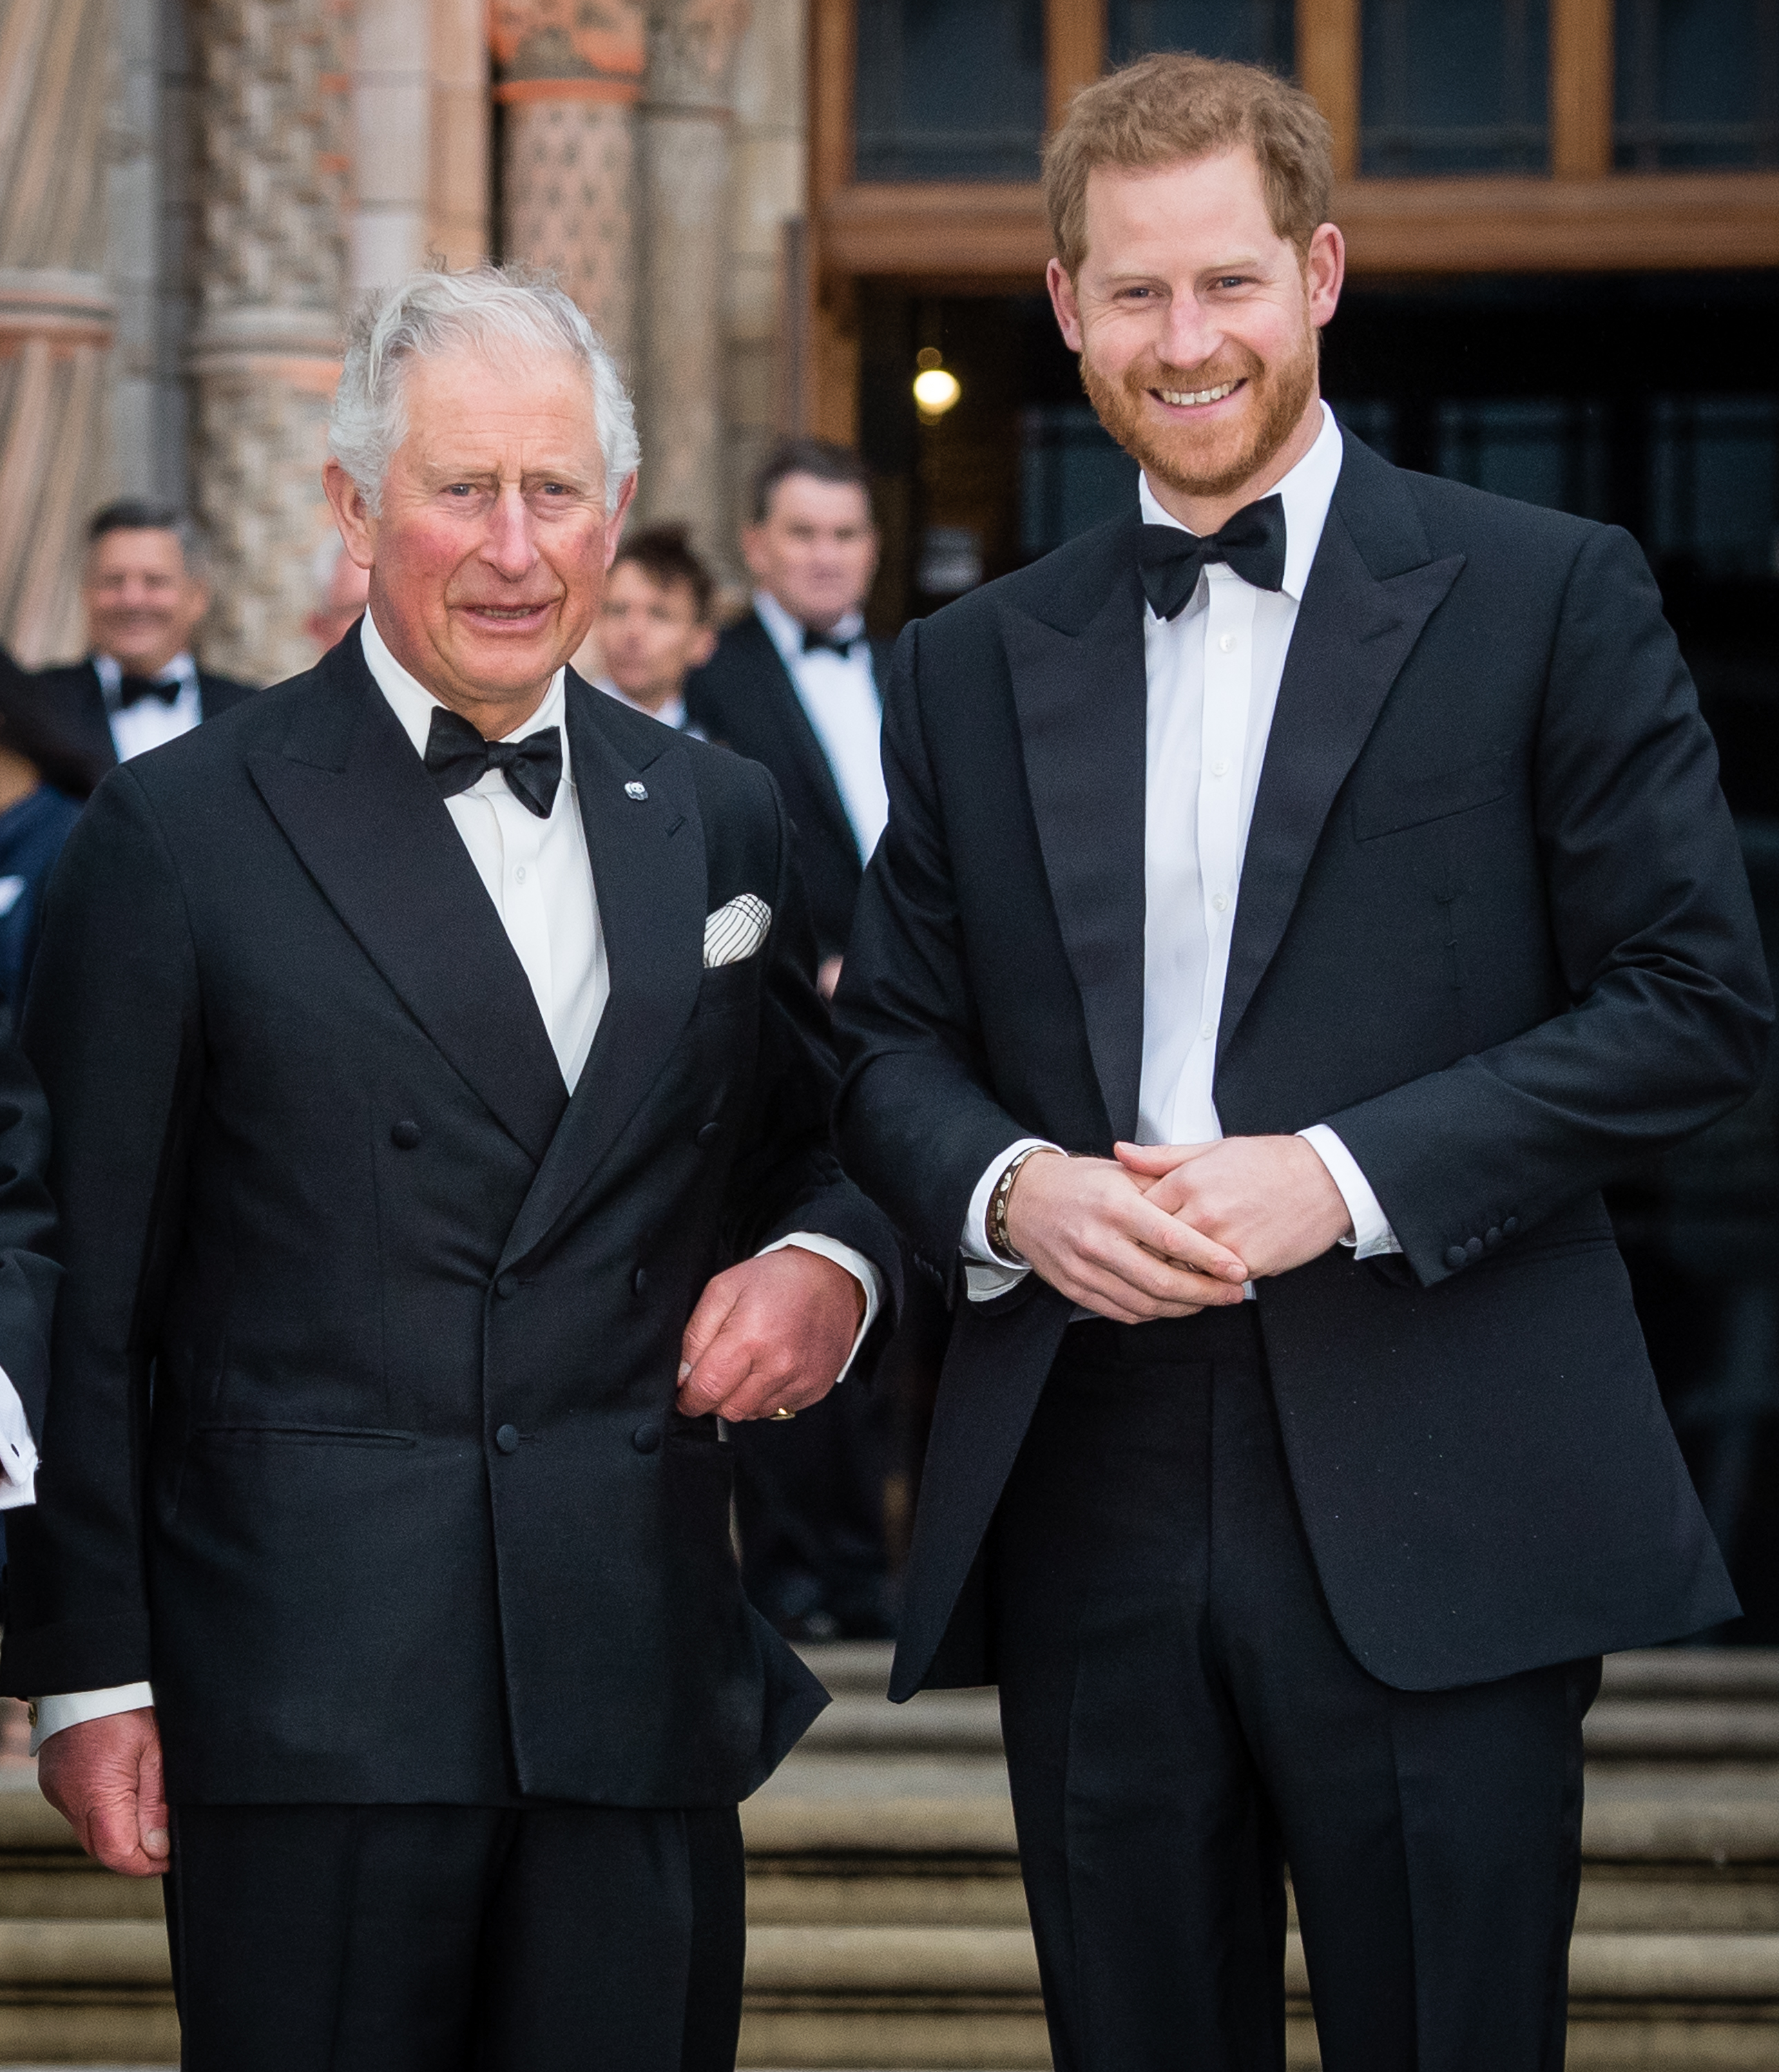 King Charles III and Prince Harry, Duke of Sussex attend the "Our Planet" global premiere on April 04, 2019 | Source: Getty Images